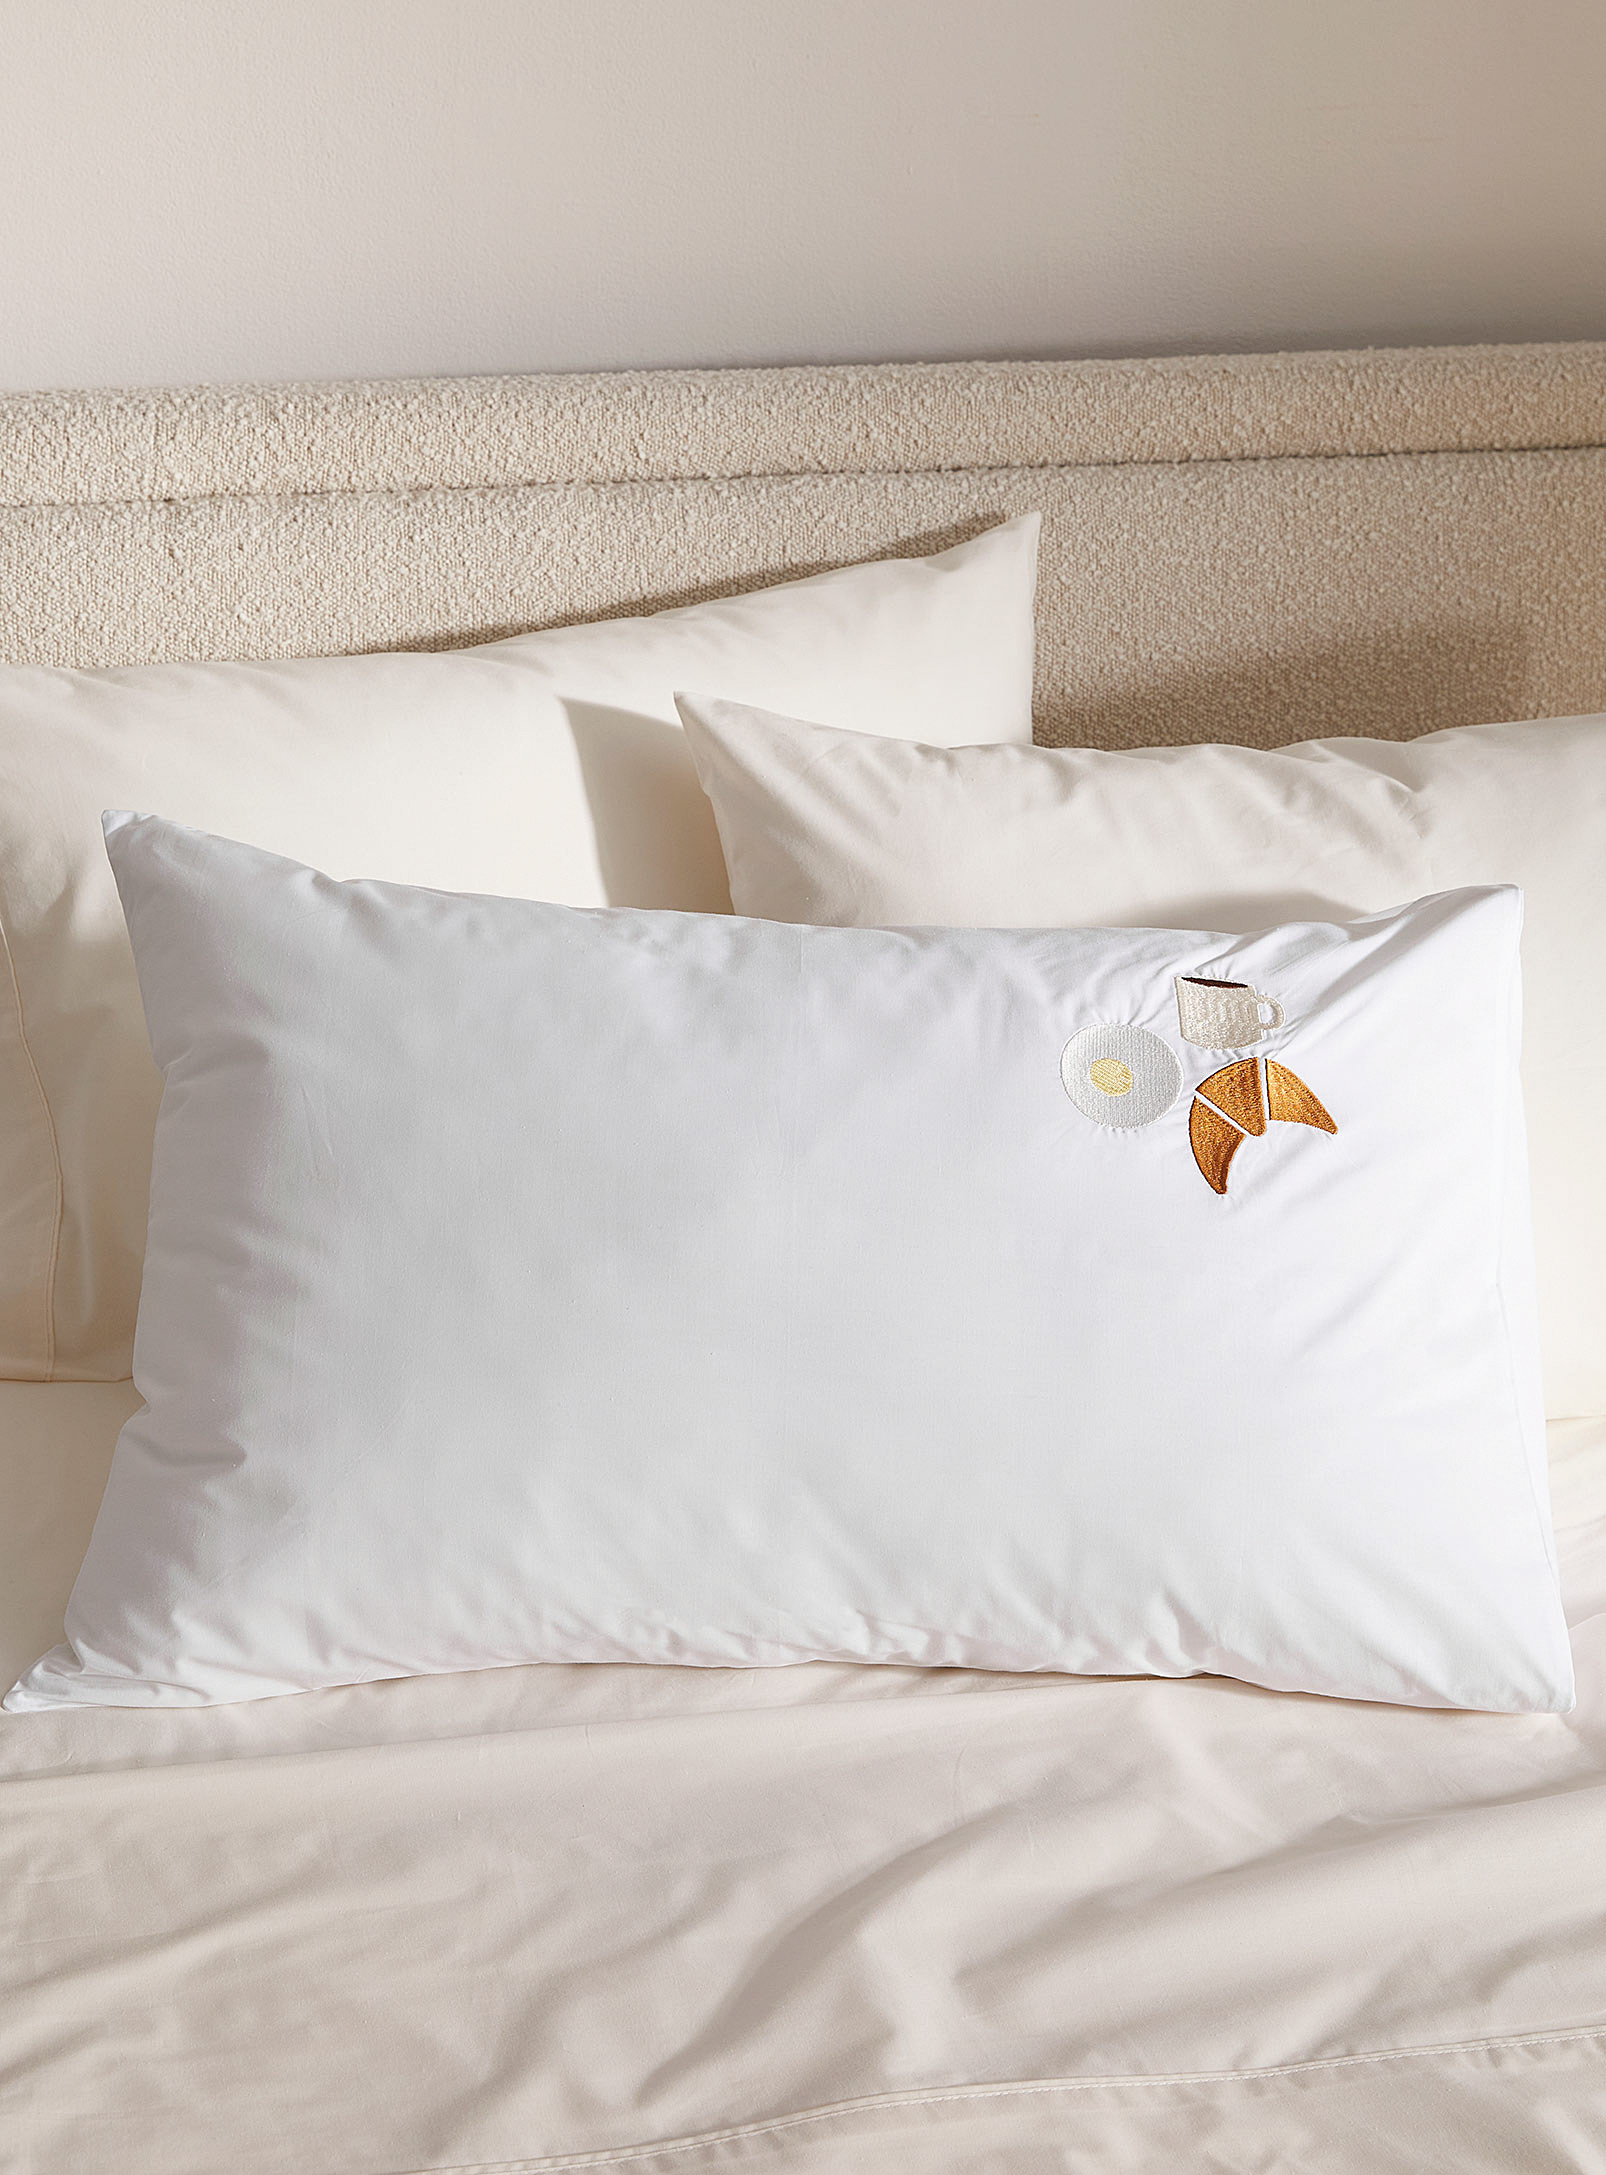 Simons Maison - Breakfast in bed embroidered pillowcase